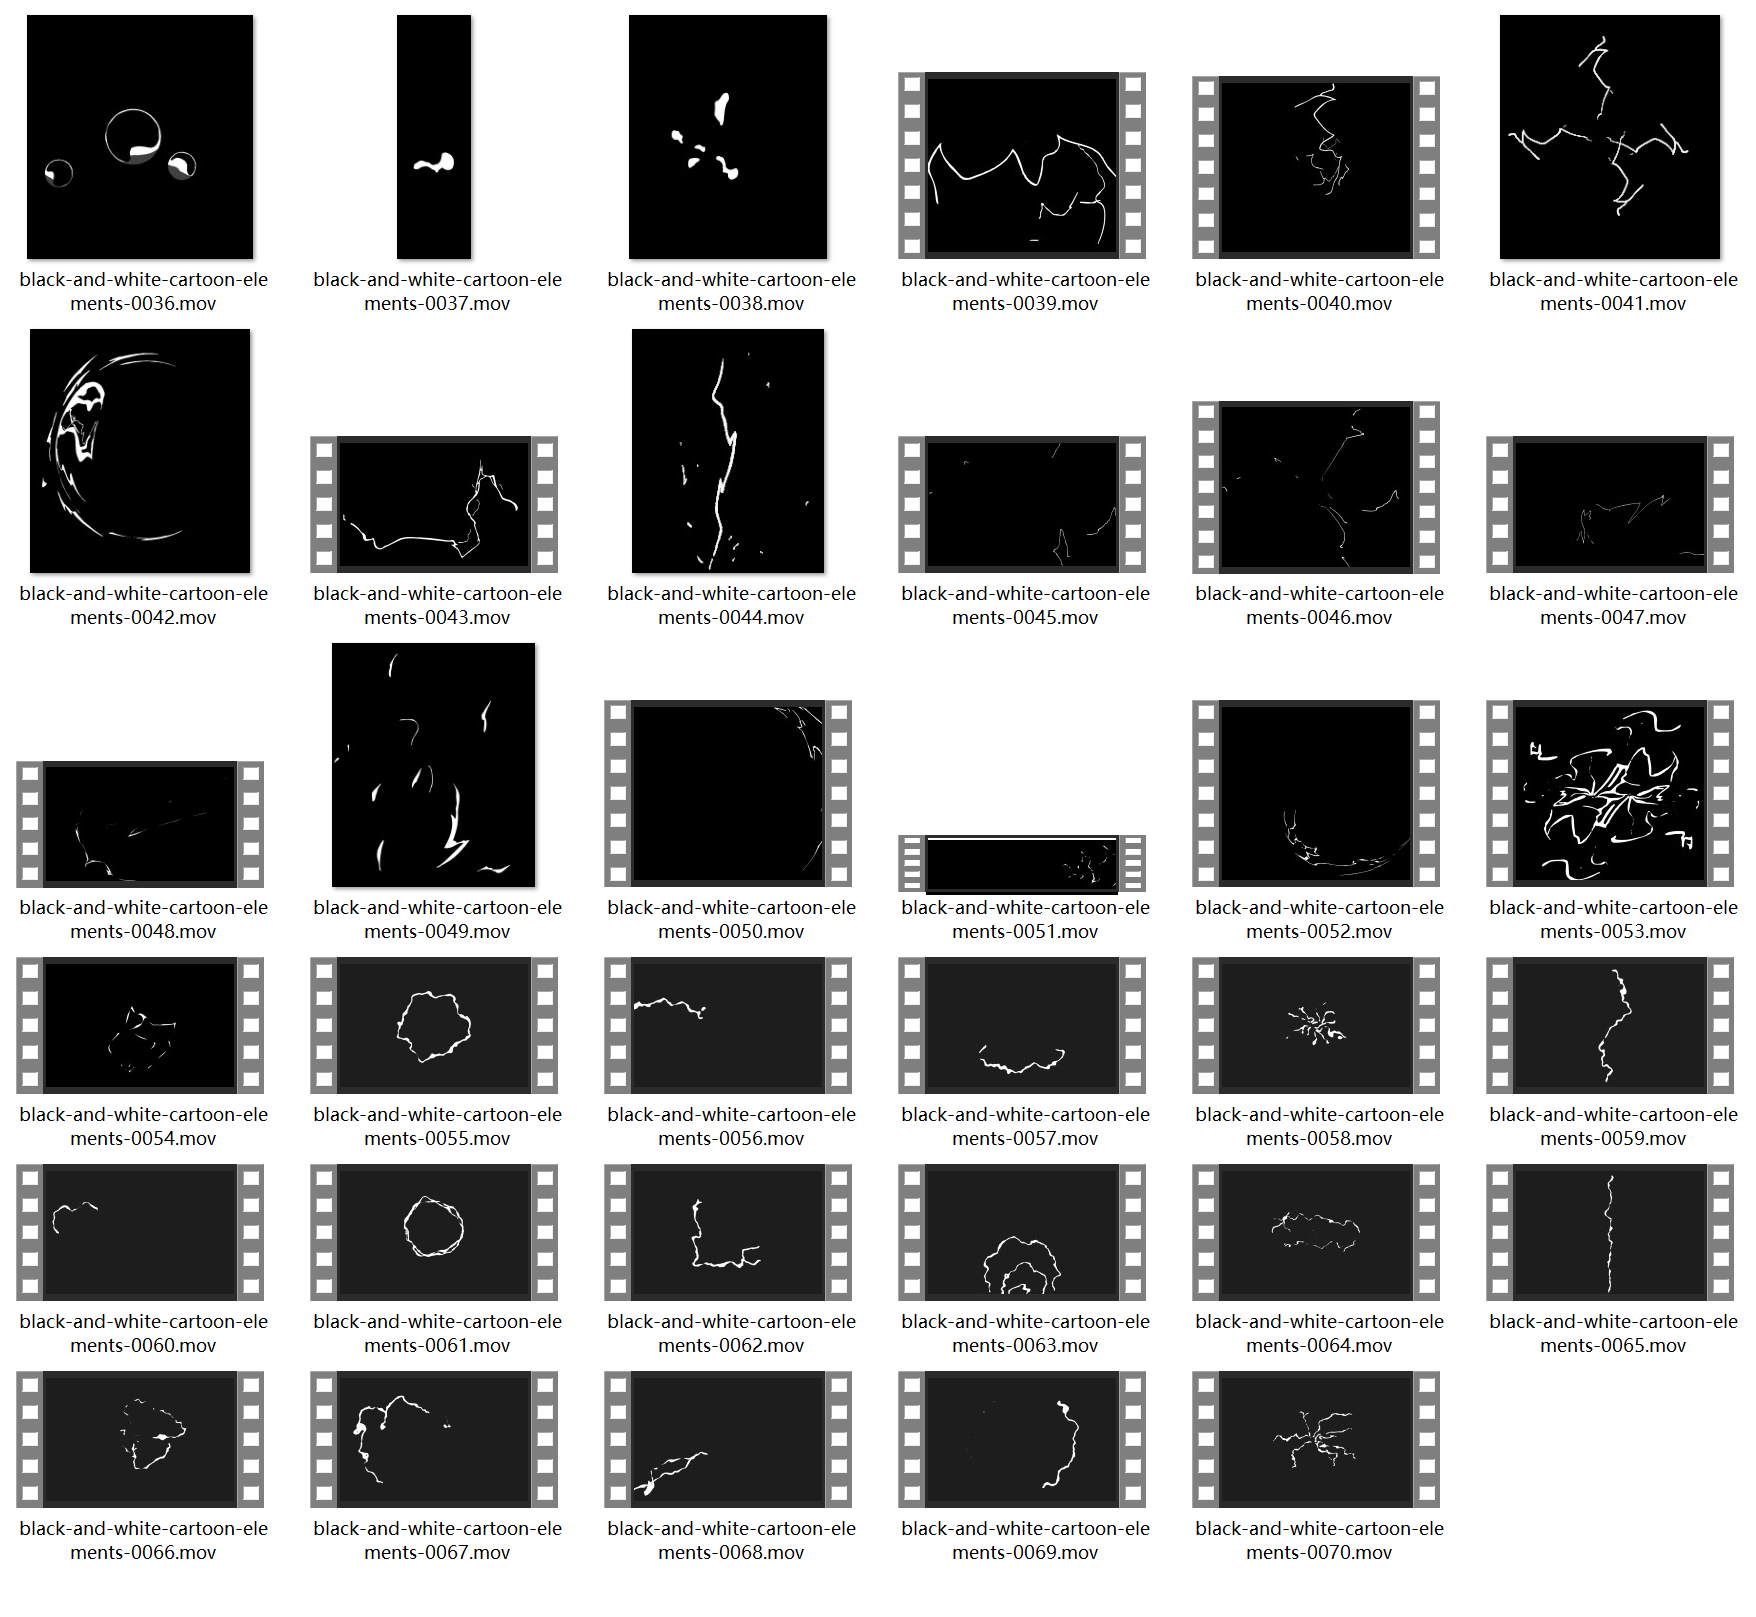 black and white cartoon elements-s0220002a1